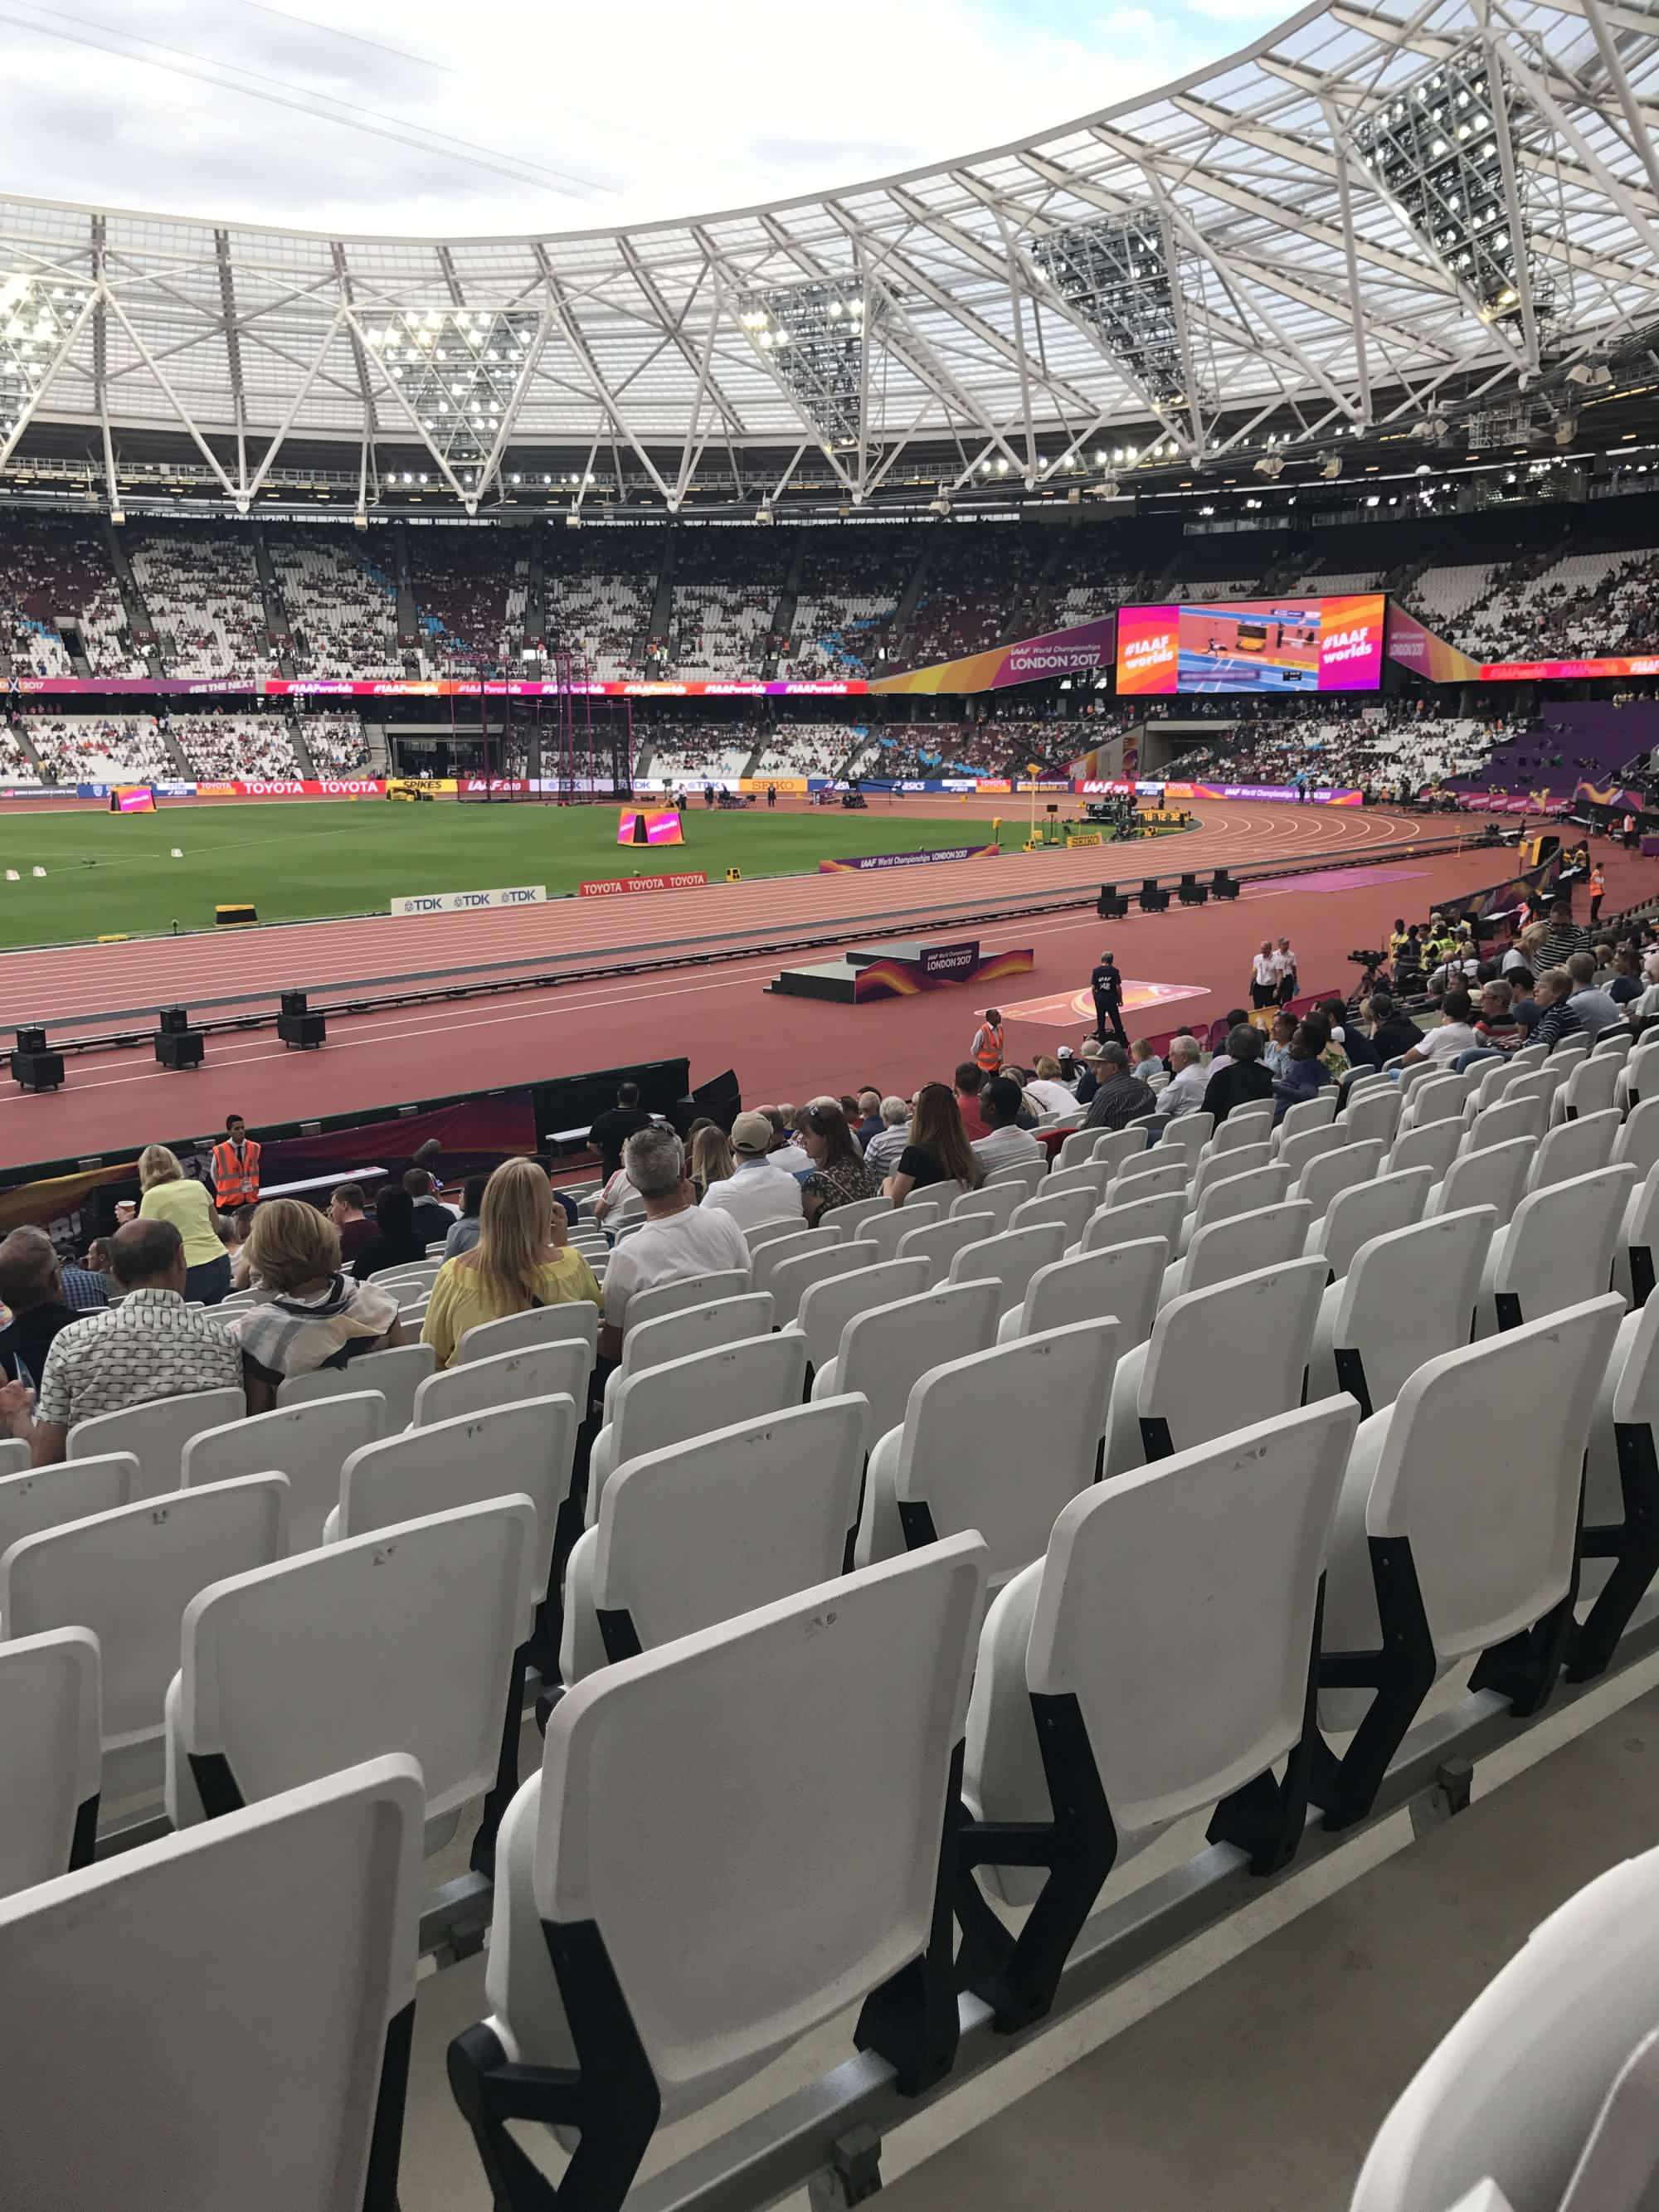 View from Seat Block 105 at London Stadium